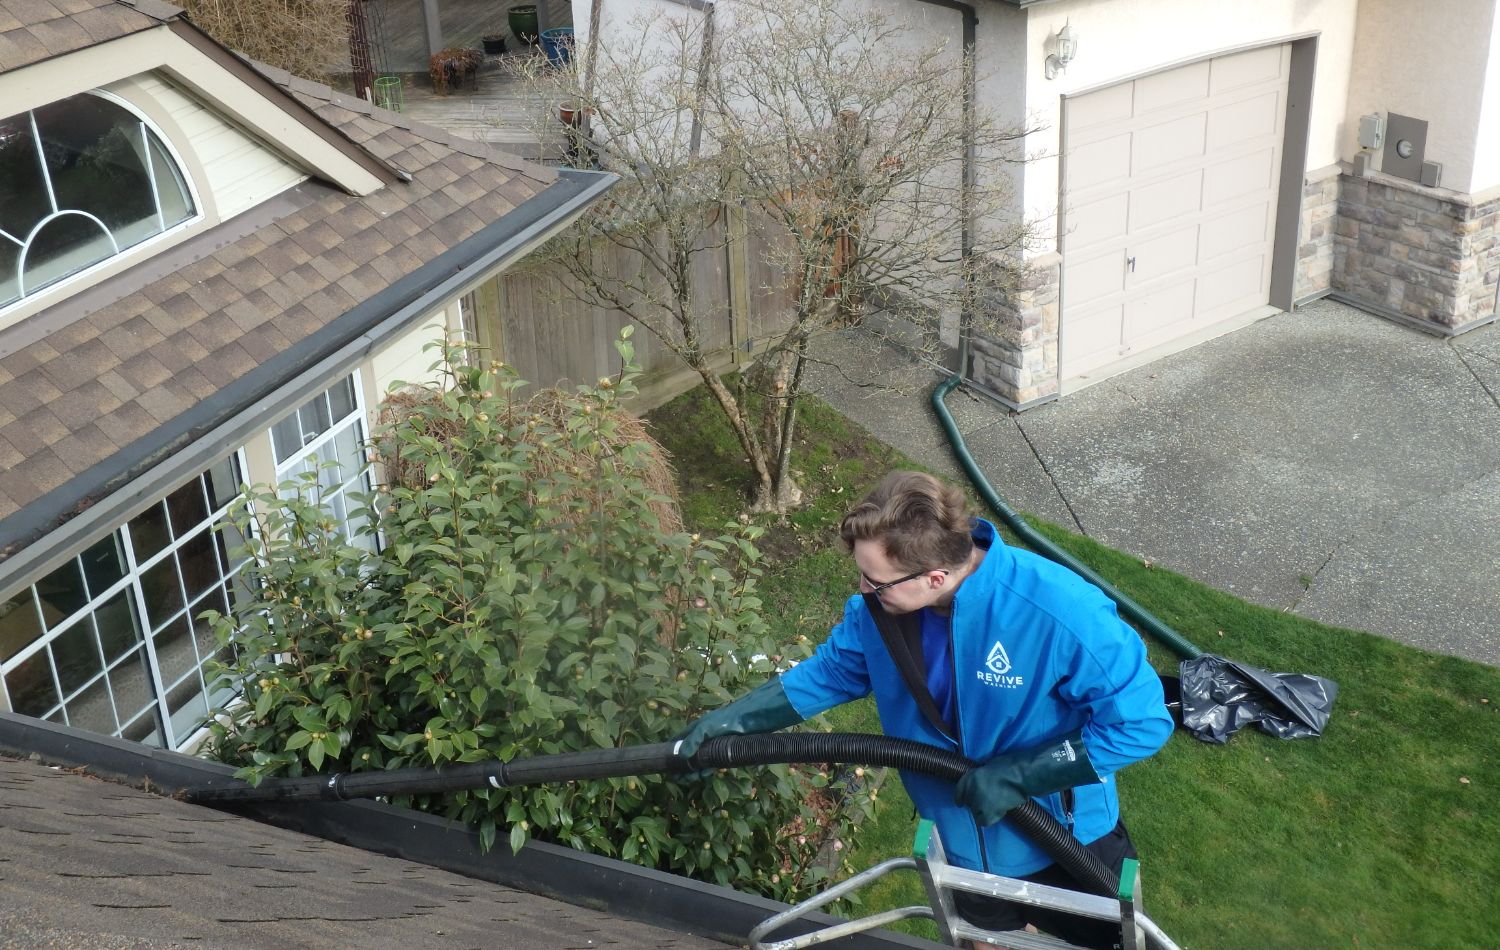 Gutter Cleaning Service Company Near Me in Surrey BC 102